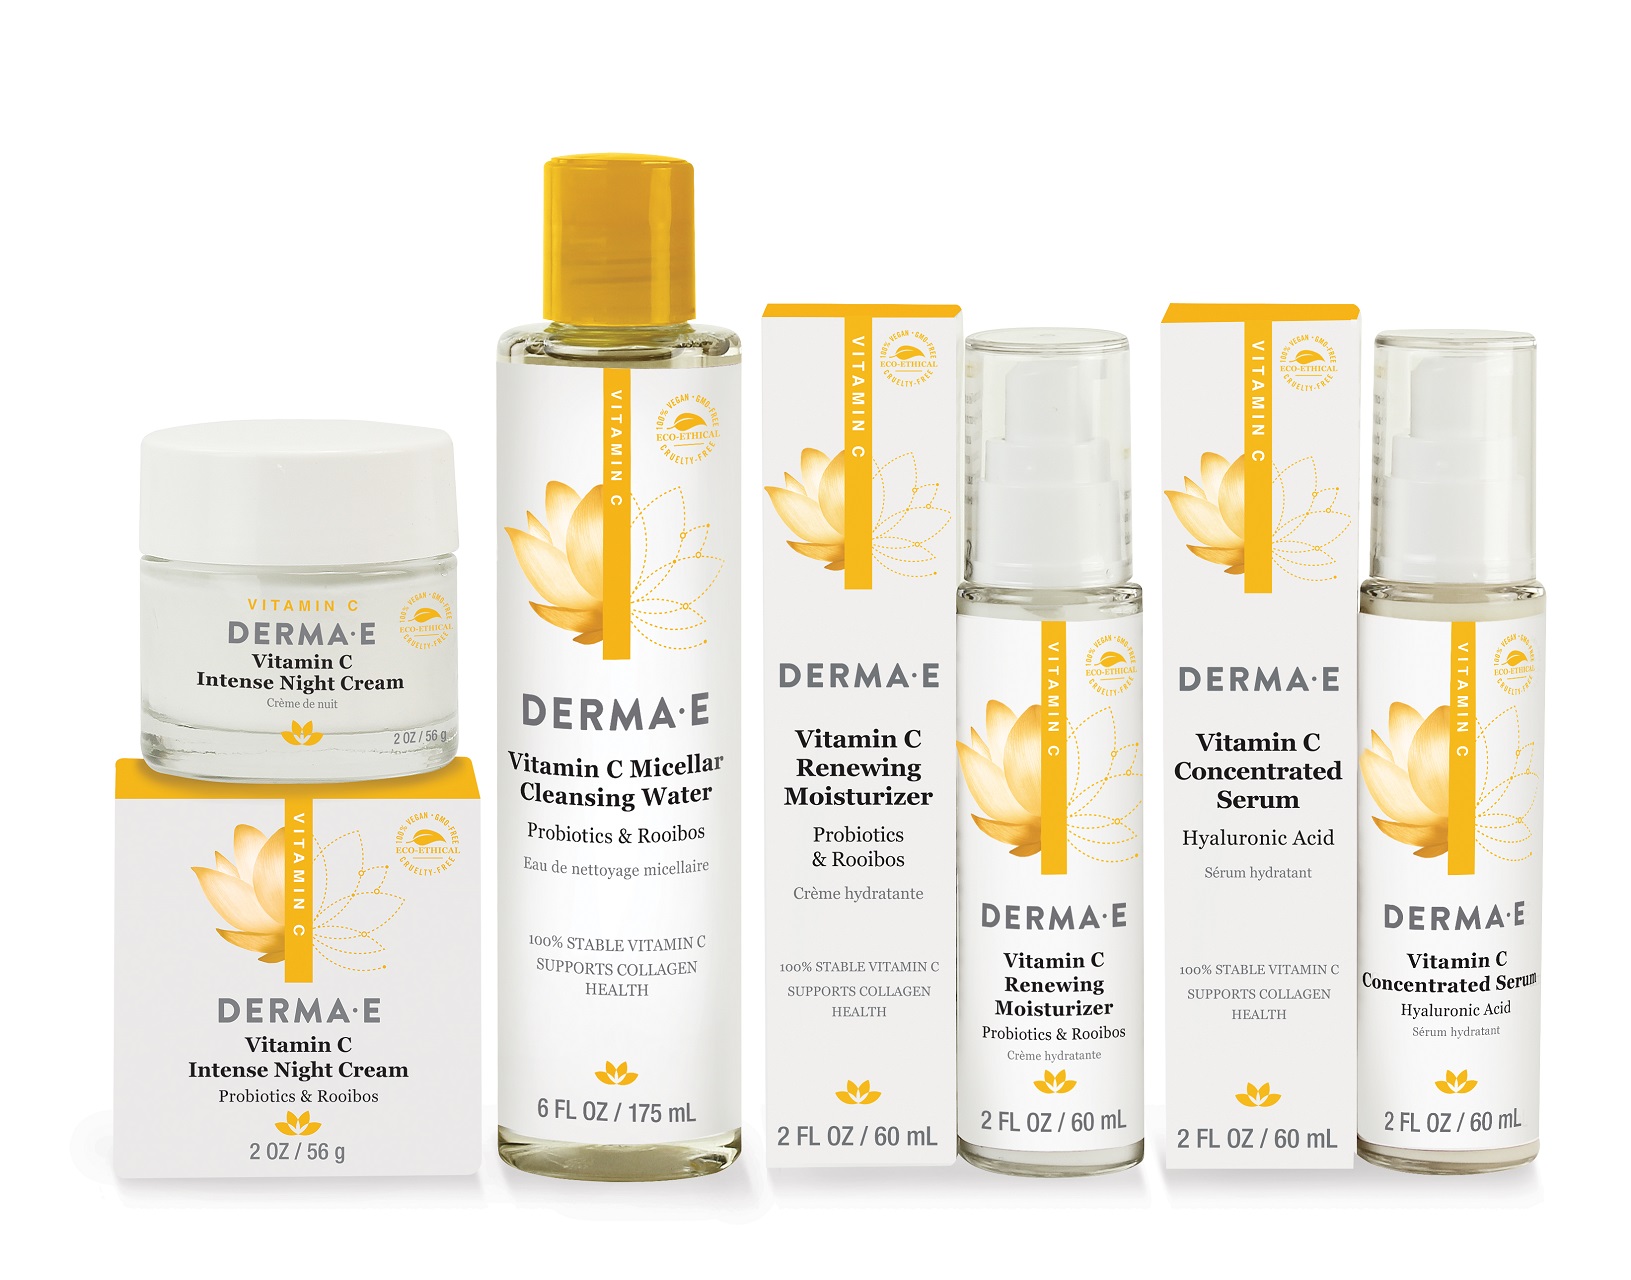 All Derma E products are vegan, cruelty-free and […] 